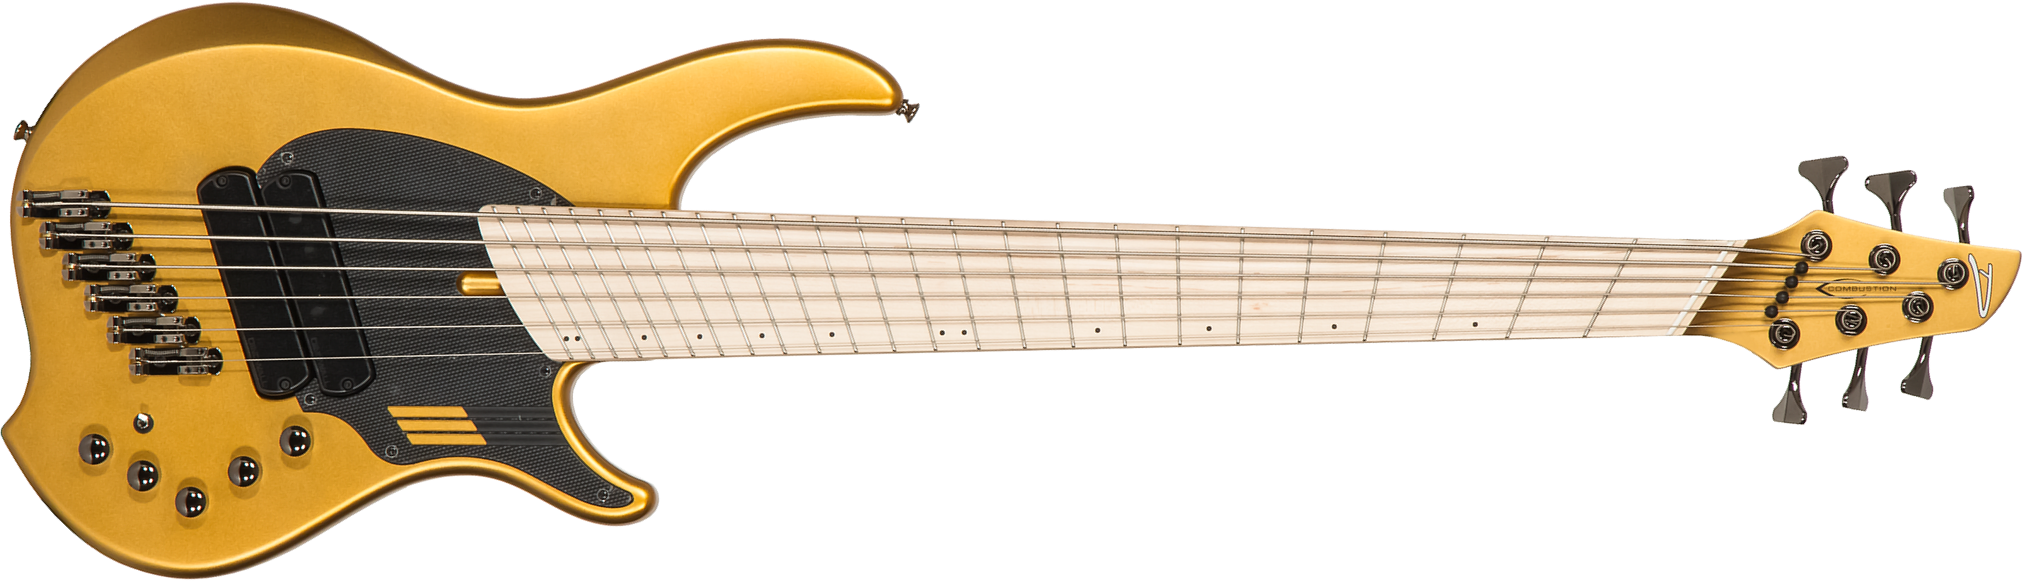 Dingwall Adam Nolly Getgood Ng2 6c 2pu Signature Active Mn - Gold Matte - Solid body elektrische bas - Main picture